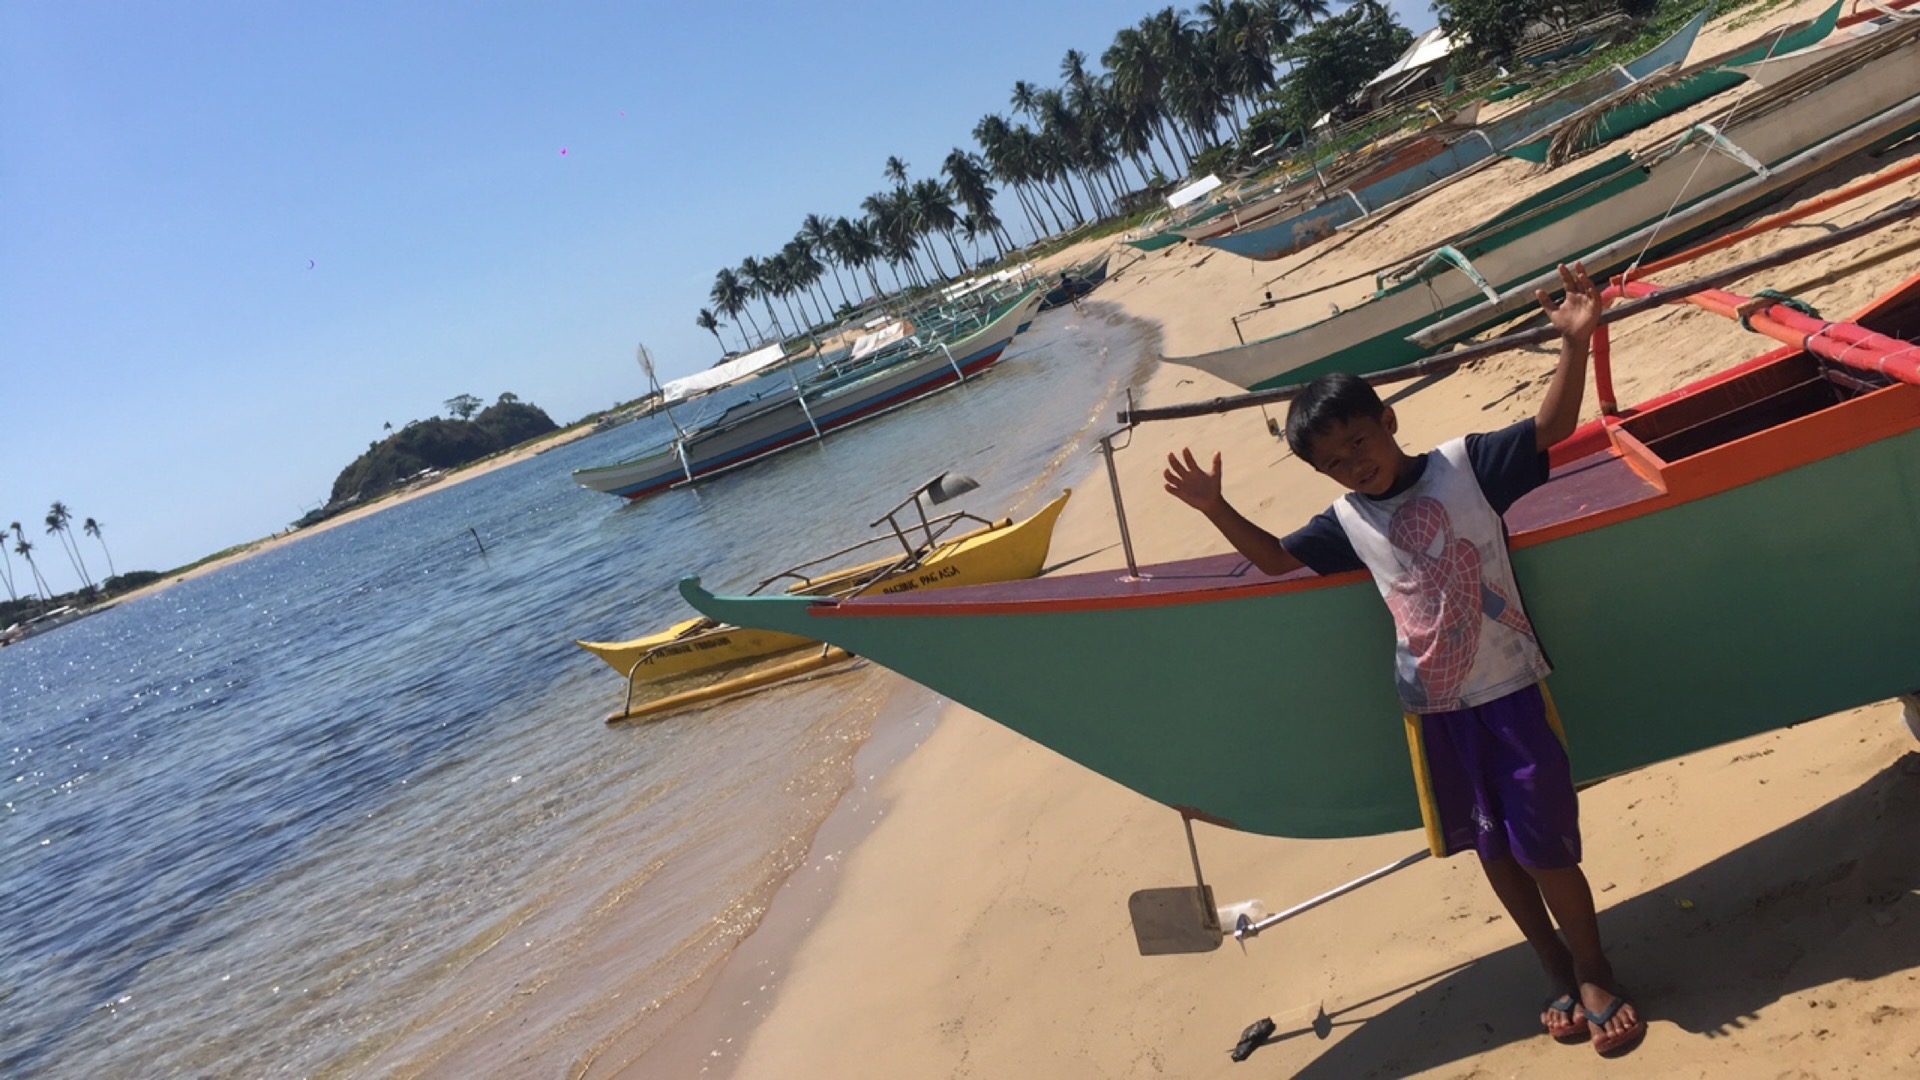 A local kid by the fishing boats by the beach in Nacpan, Philippines. The best beach in the world all to myself